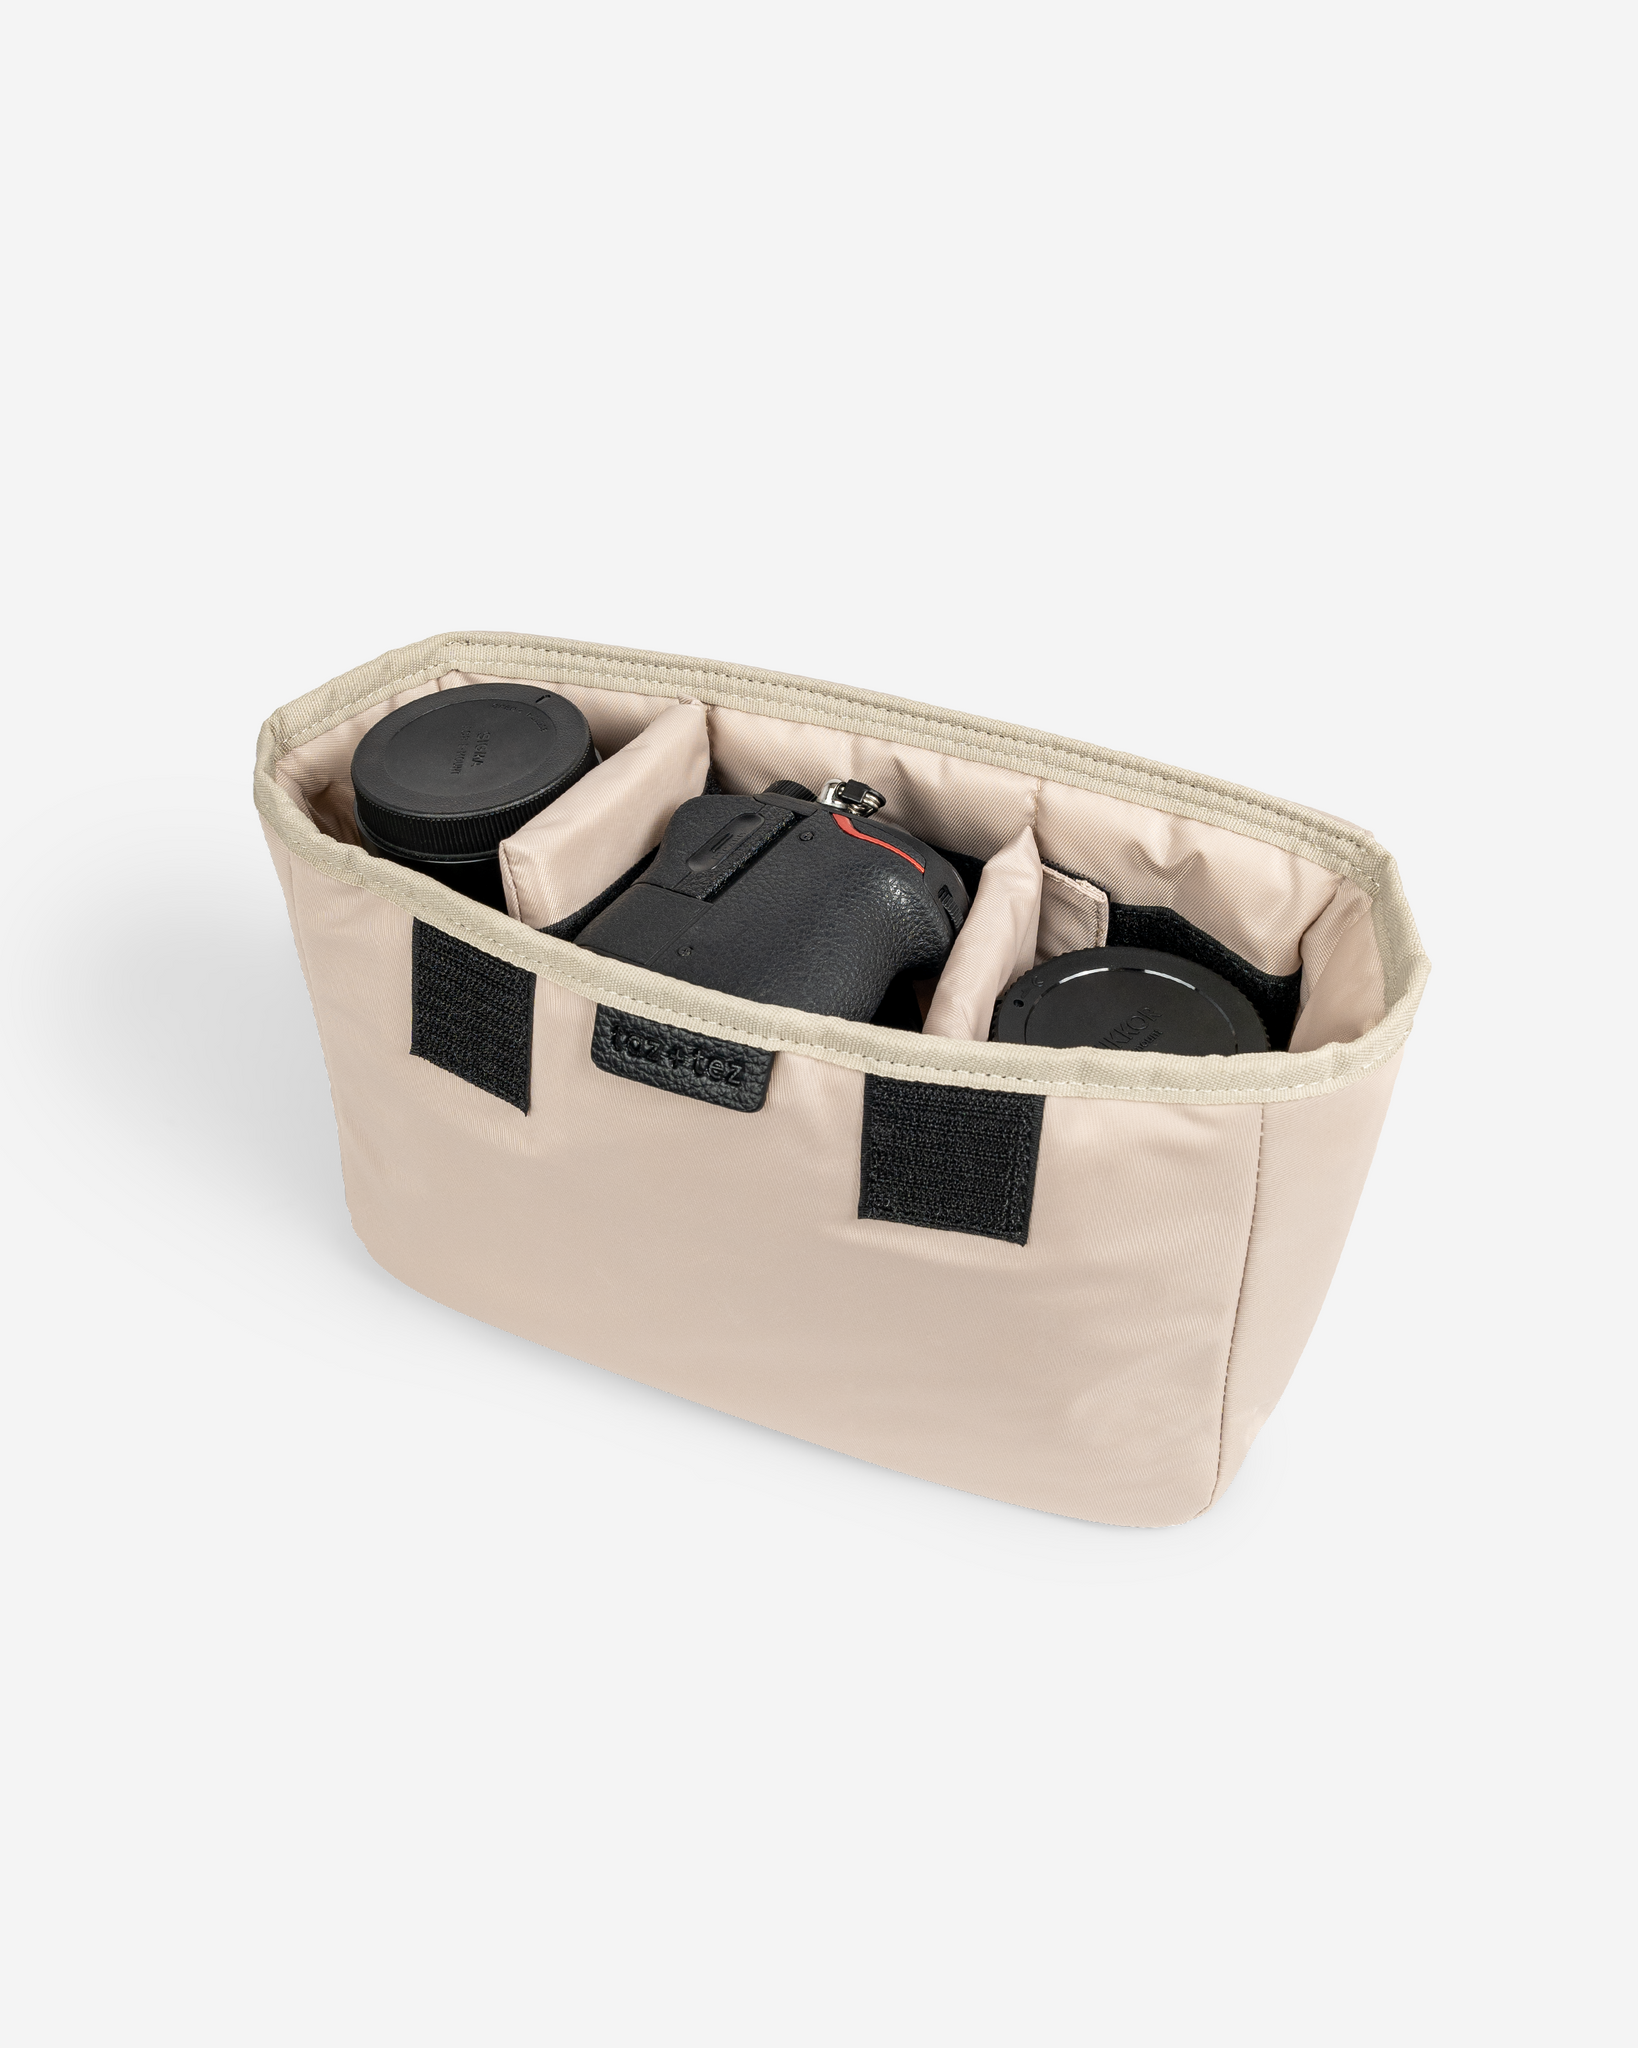 camera bag camera caddy insert with camera body and lenses inside padded lining